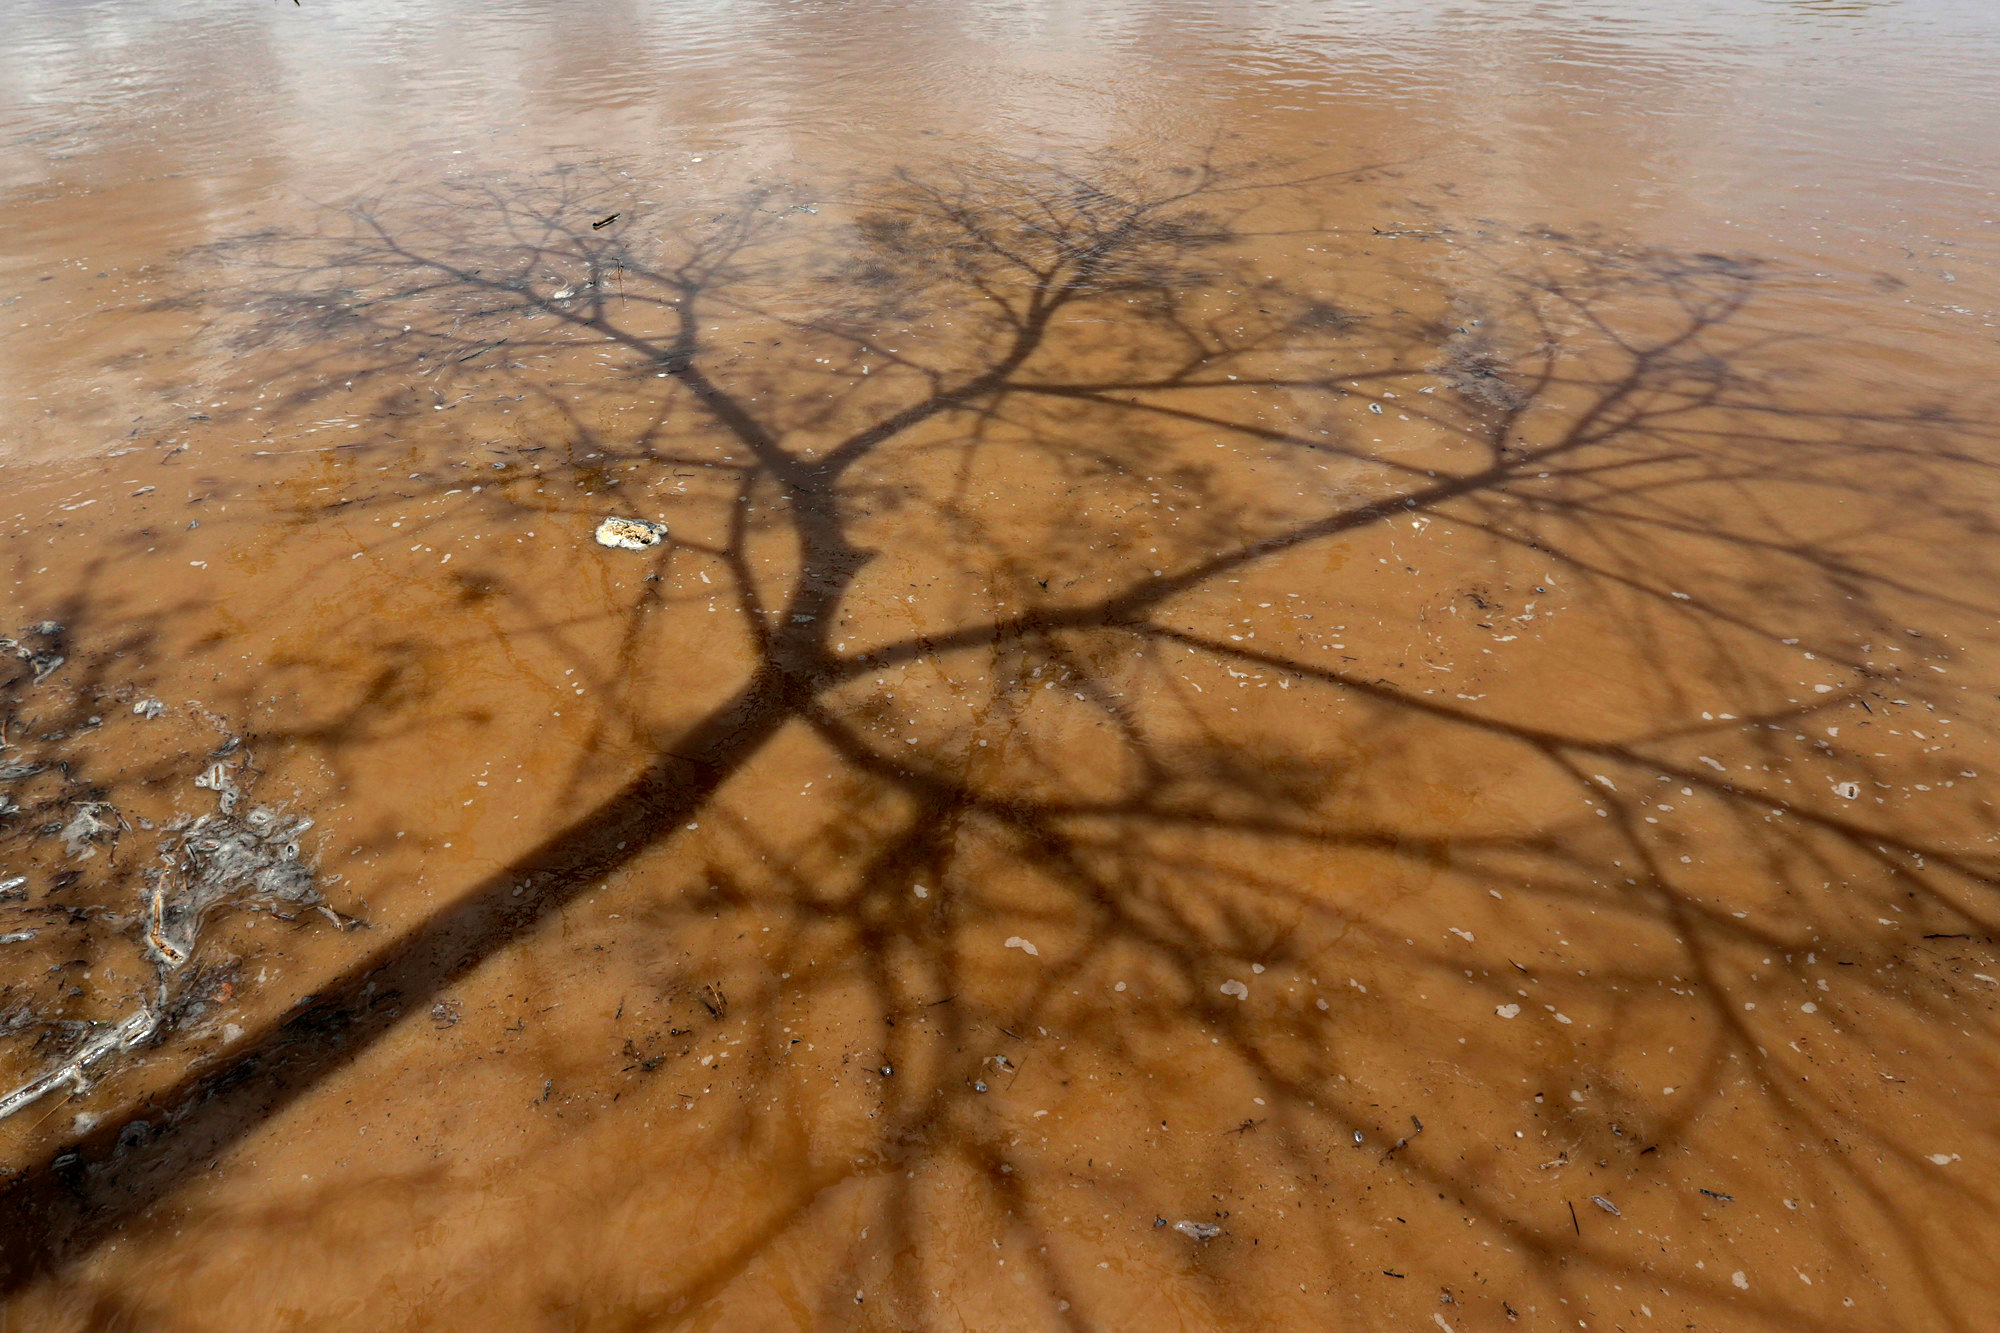 Shadow of a tree is reflected on water in Pianco, Paraiba state, Brazil, February 12, 2017. REUTERS/Ueslei Marcelino